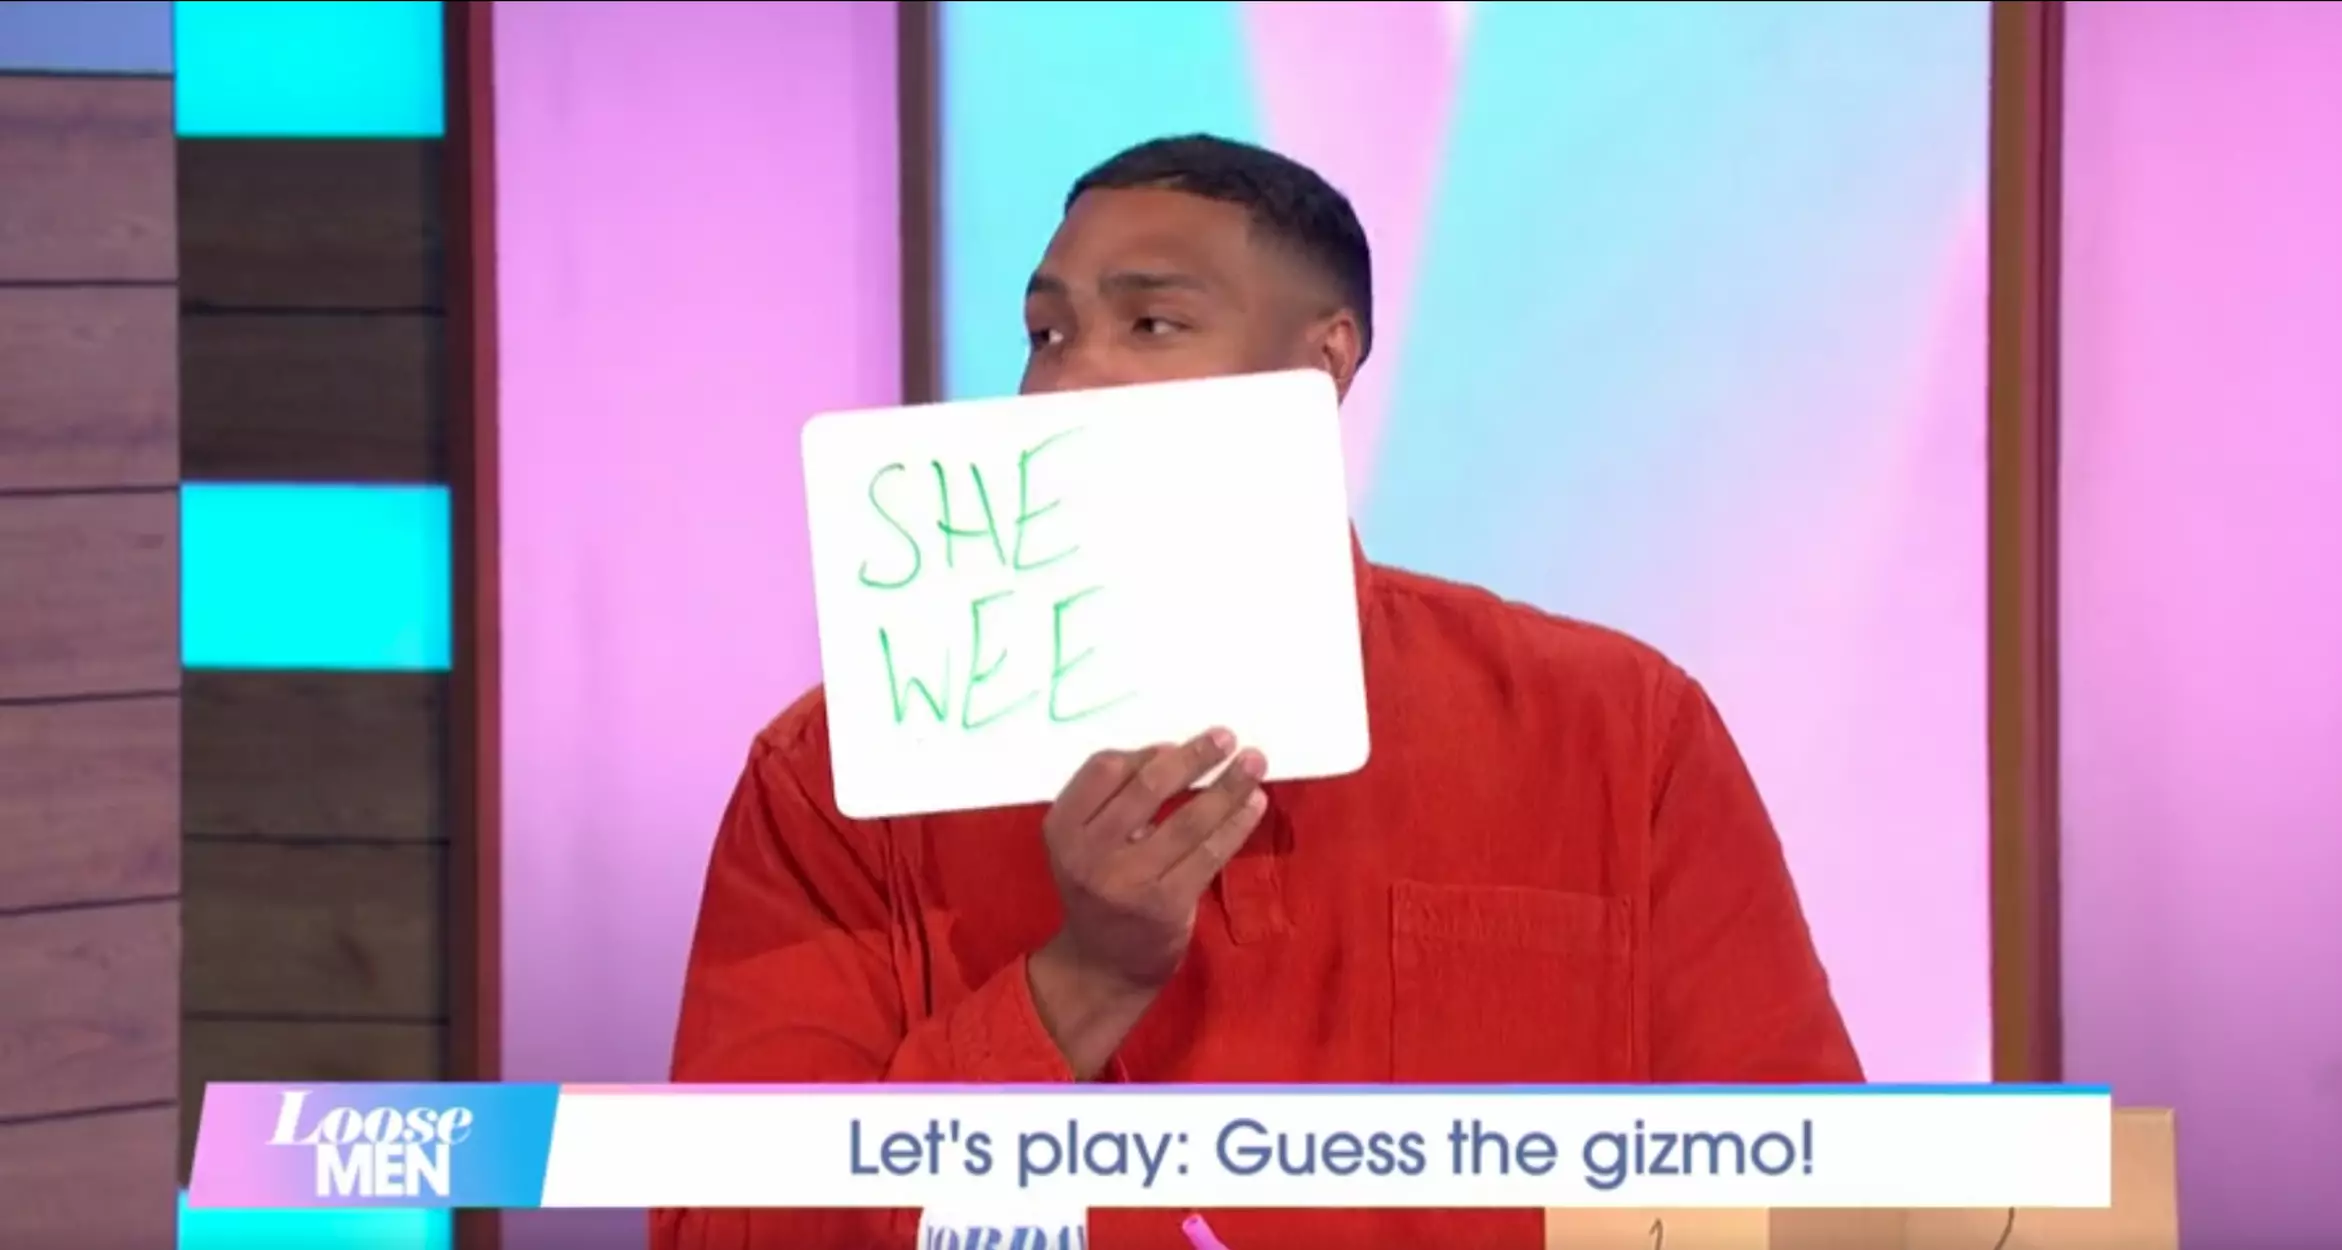 Jordan Banjo correctly guessed the product was a Shewee (